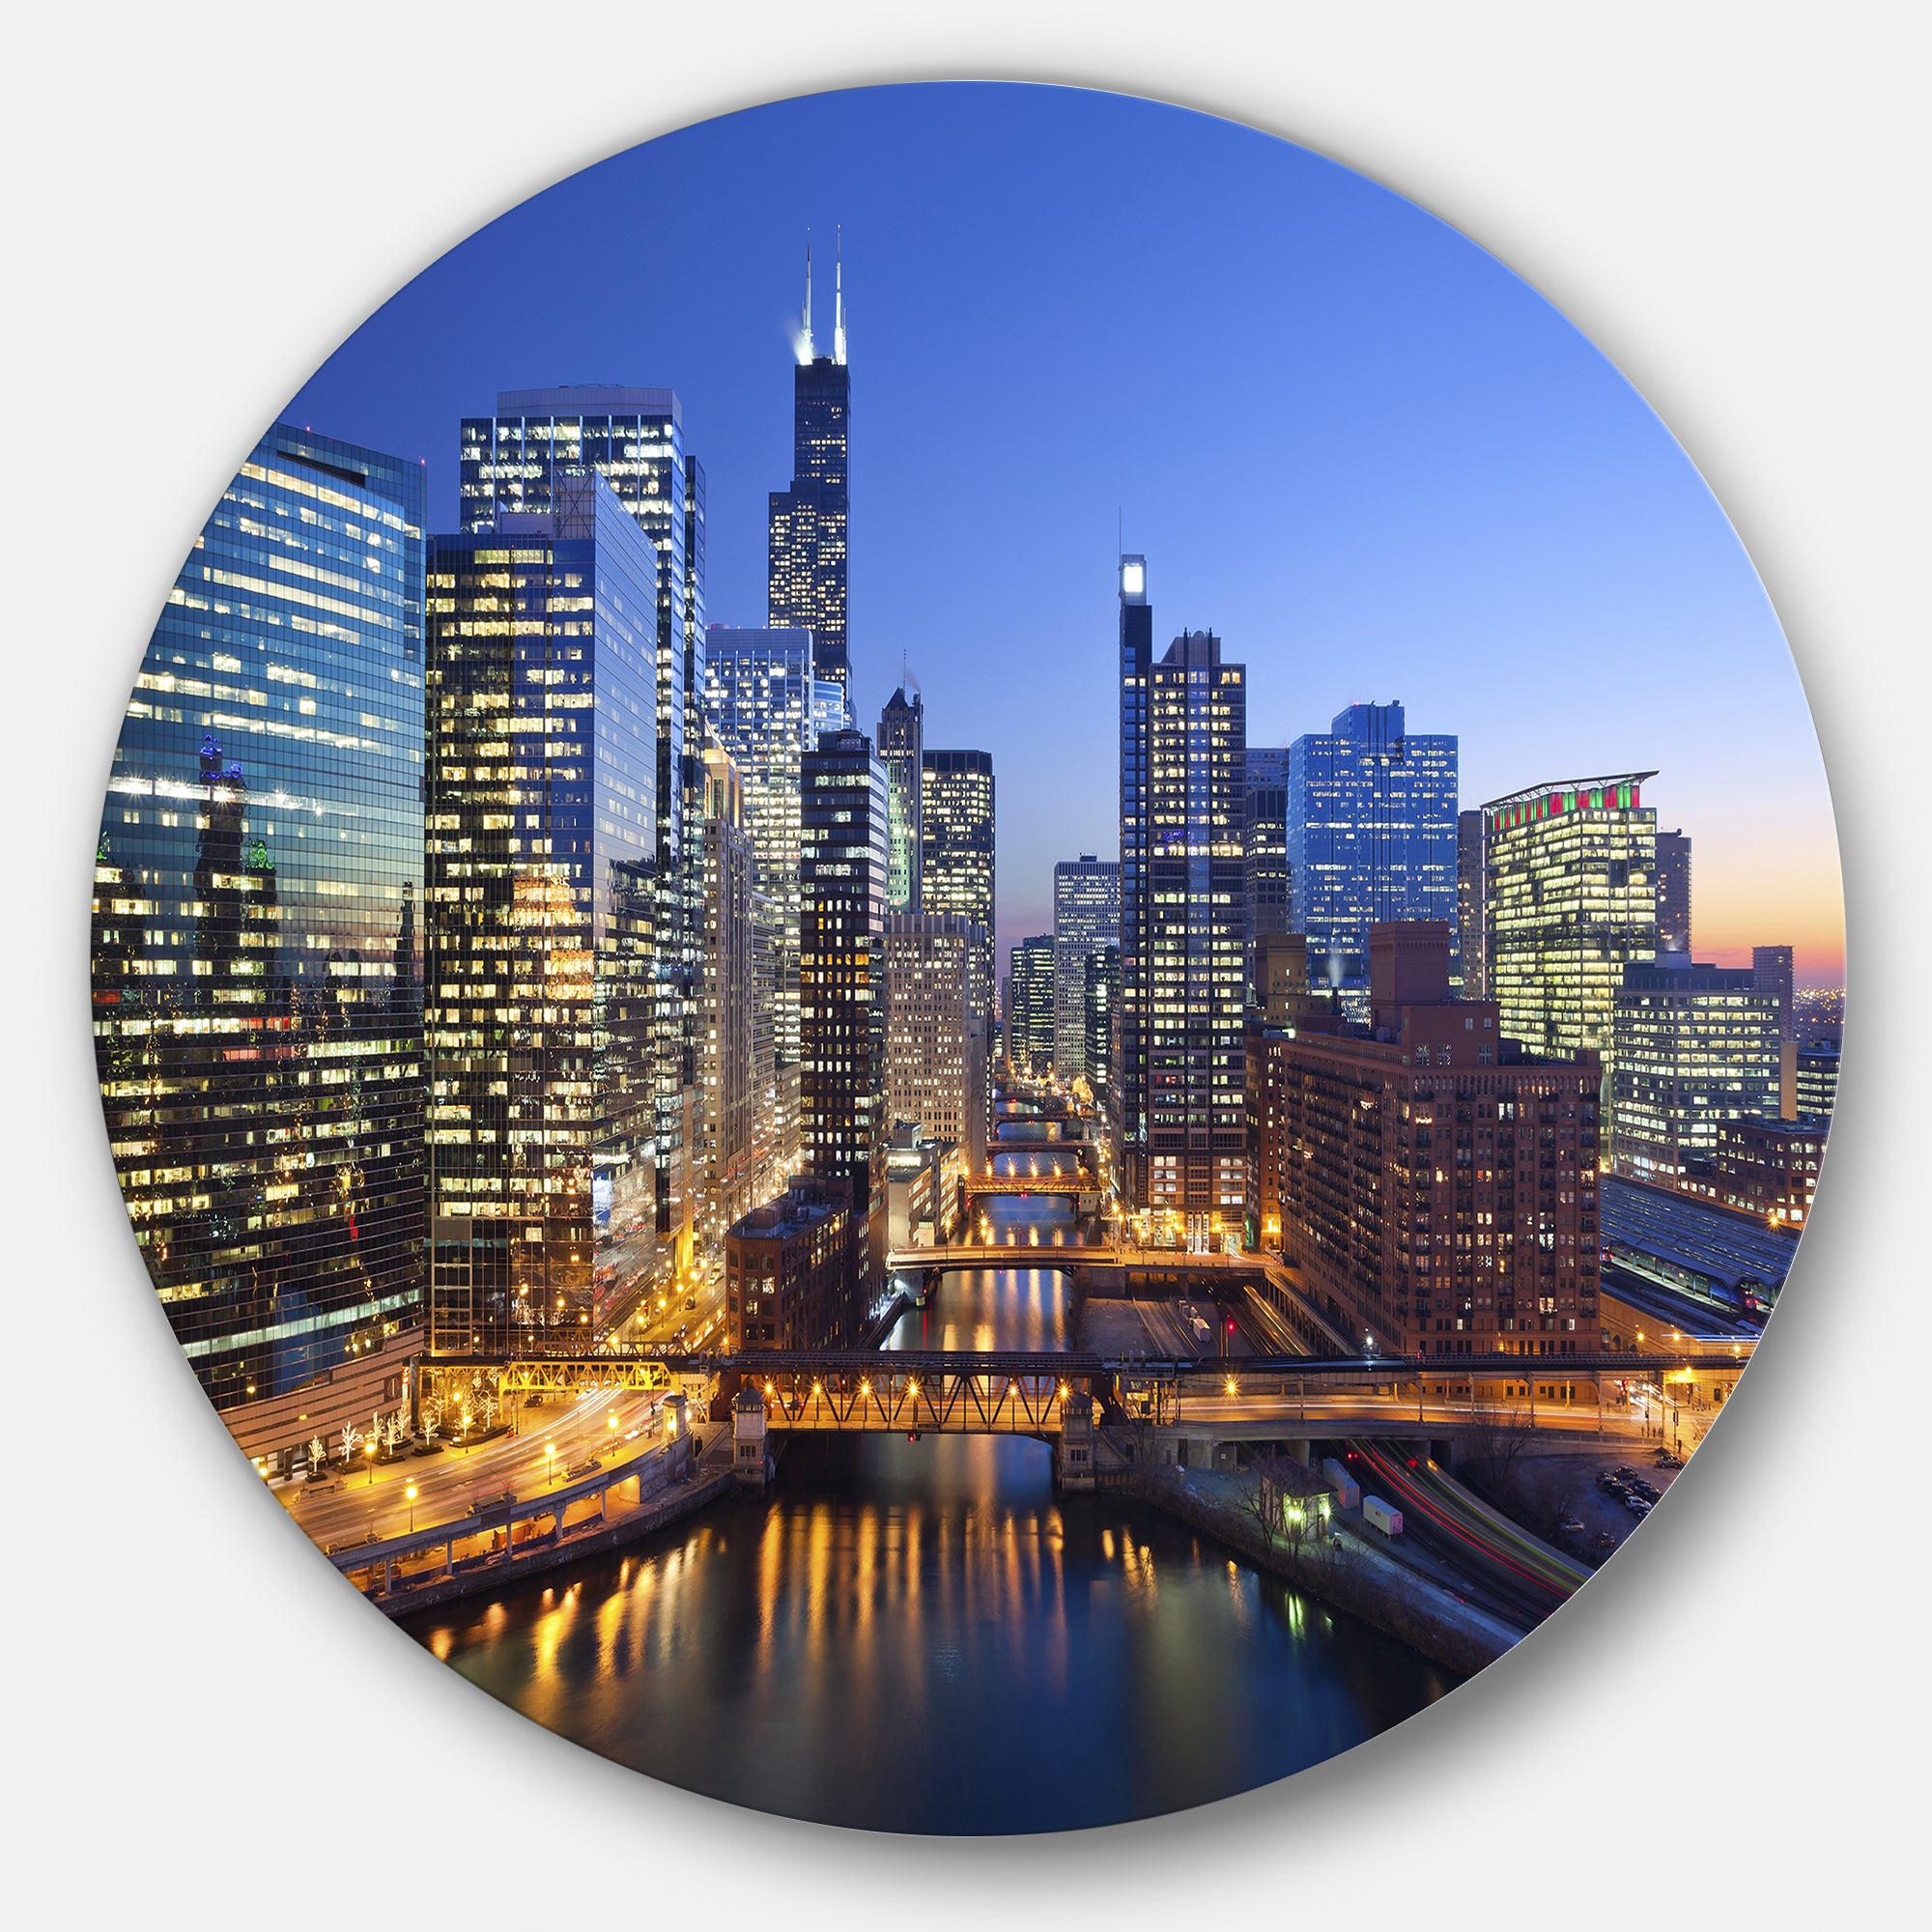 Chicago River with Bridges at Sunset' Ultra Glossy Cityscape Circle Wall Art